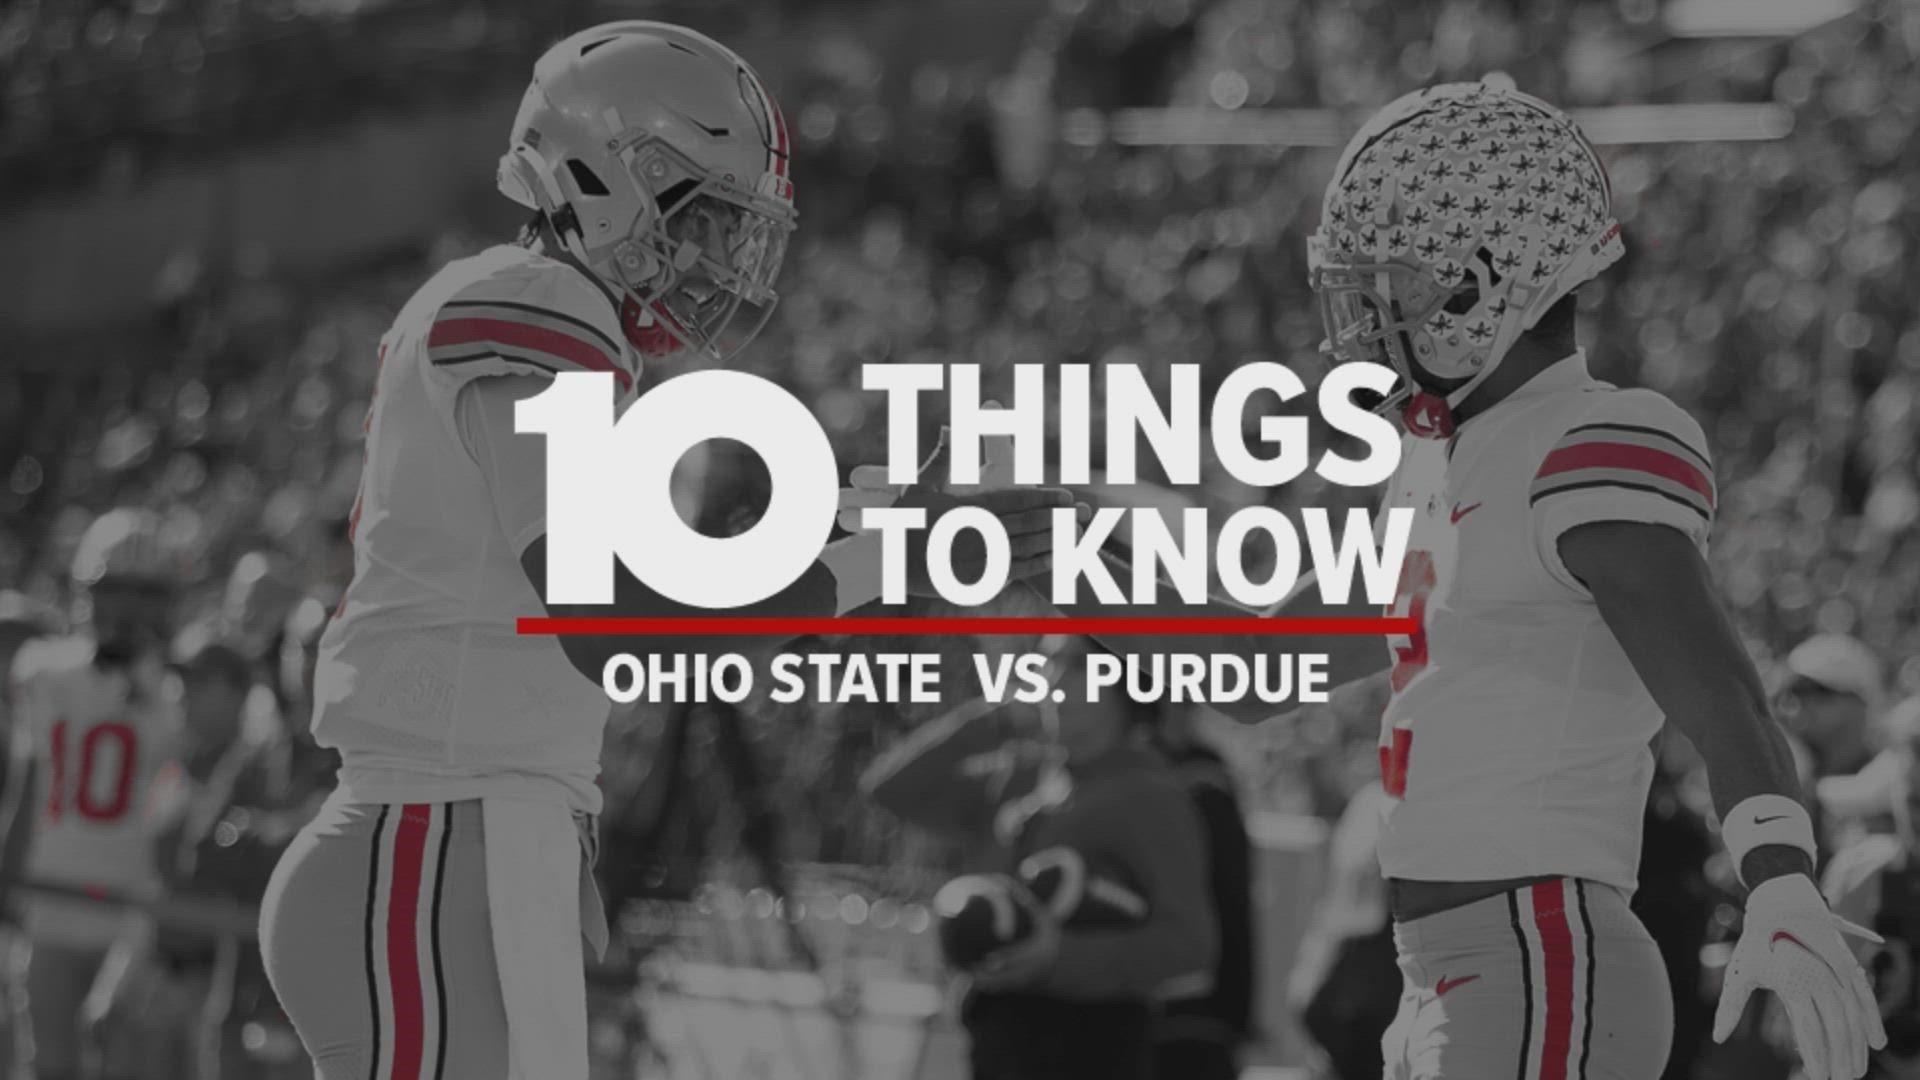 Ohio State vs. Purdue 10 Things To Know